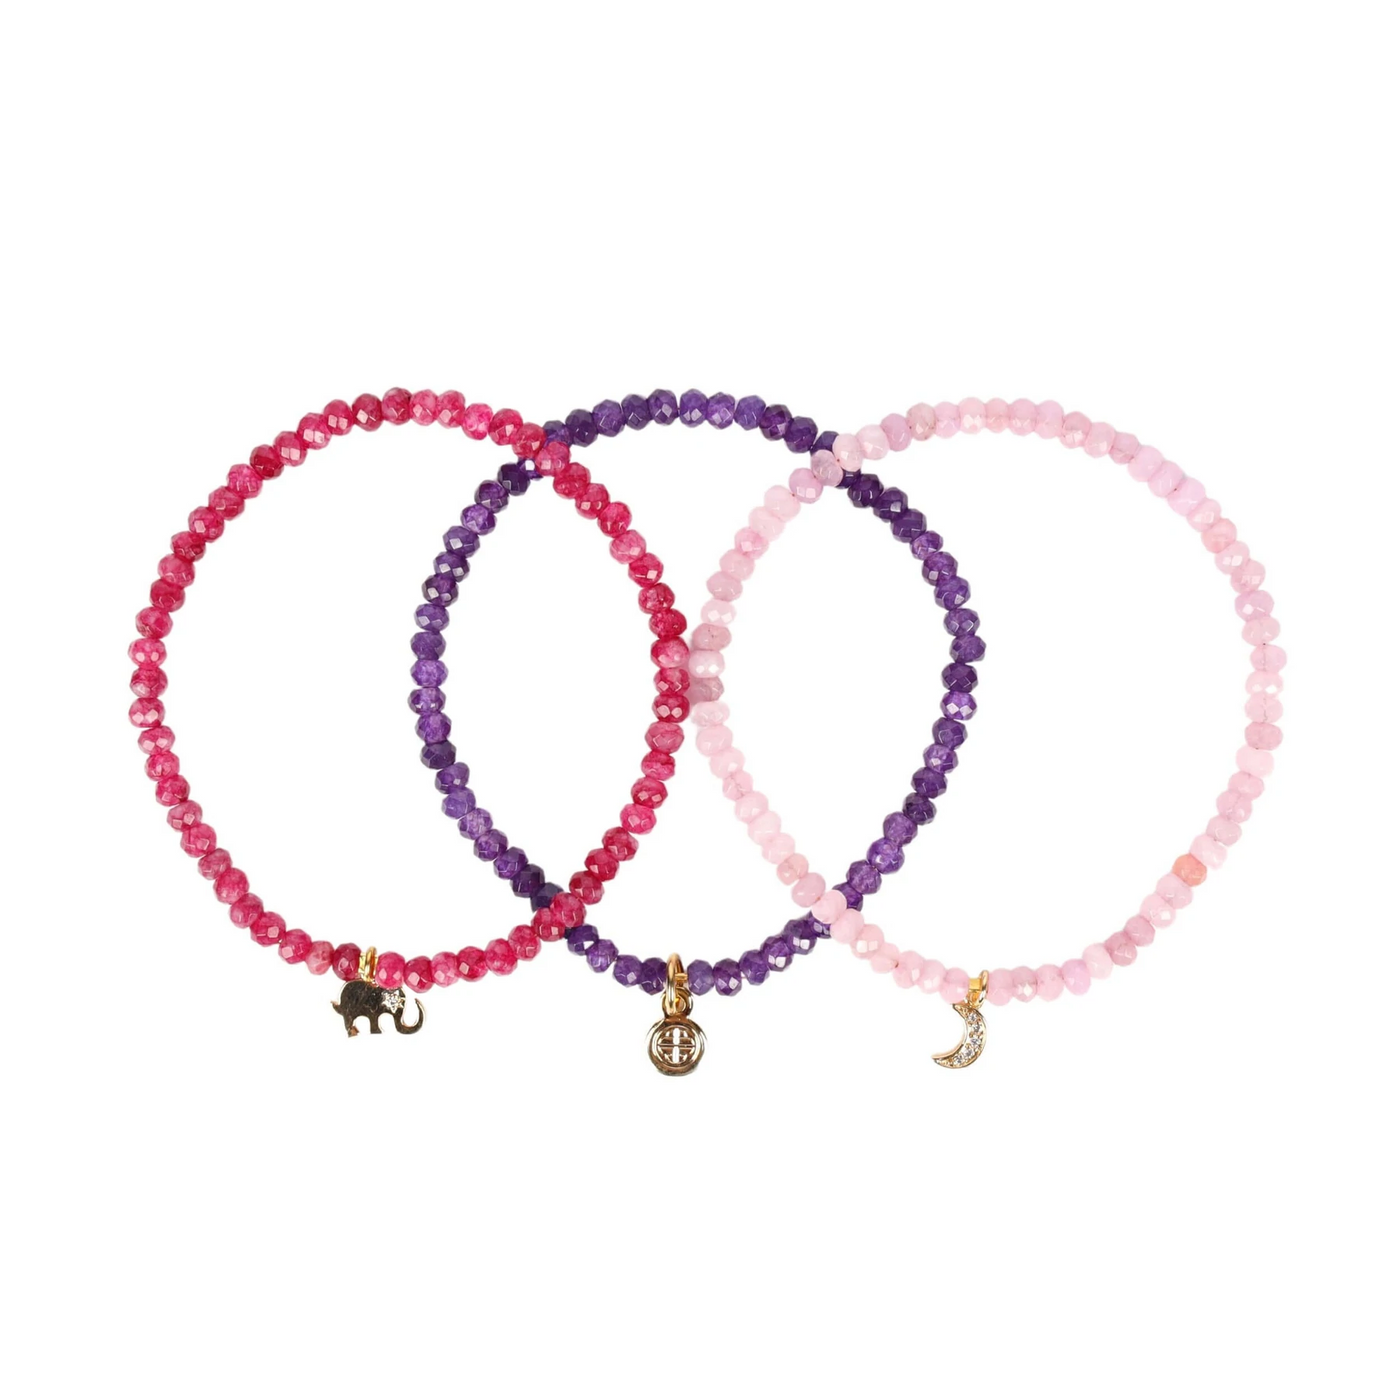 BUDHAGIRL BRACELETS SYDNEY - SET OF 3 (Available in Colors)